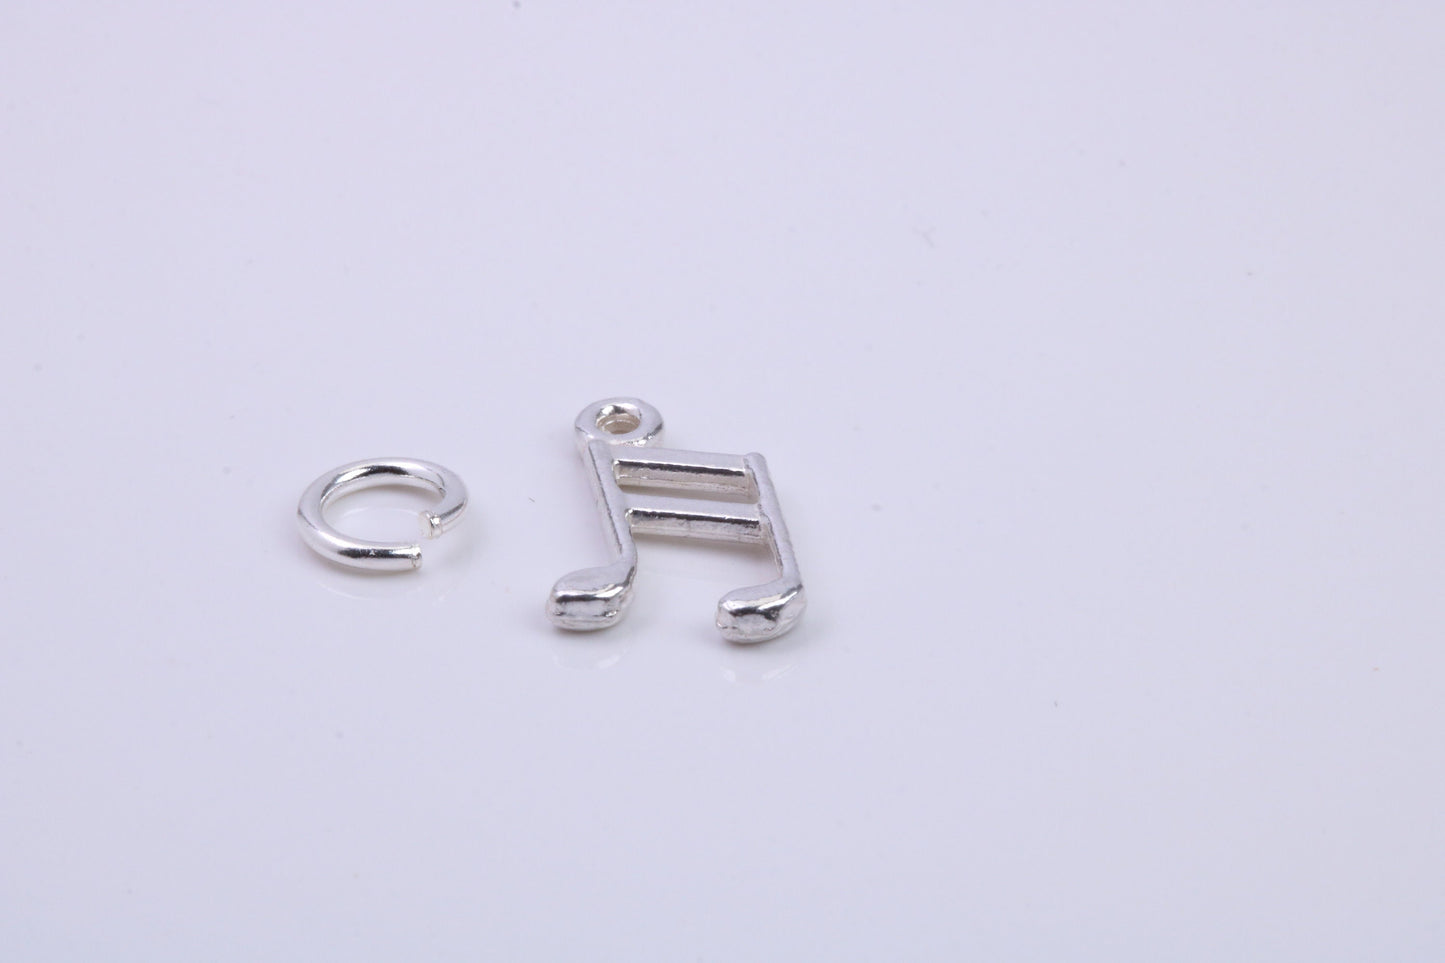 Musical Beam Note Charm, Traditional Charm, Made from Solid 925 Grade Sterling Silver, Complete with Attachment Link